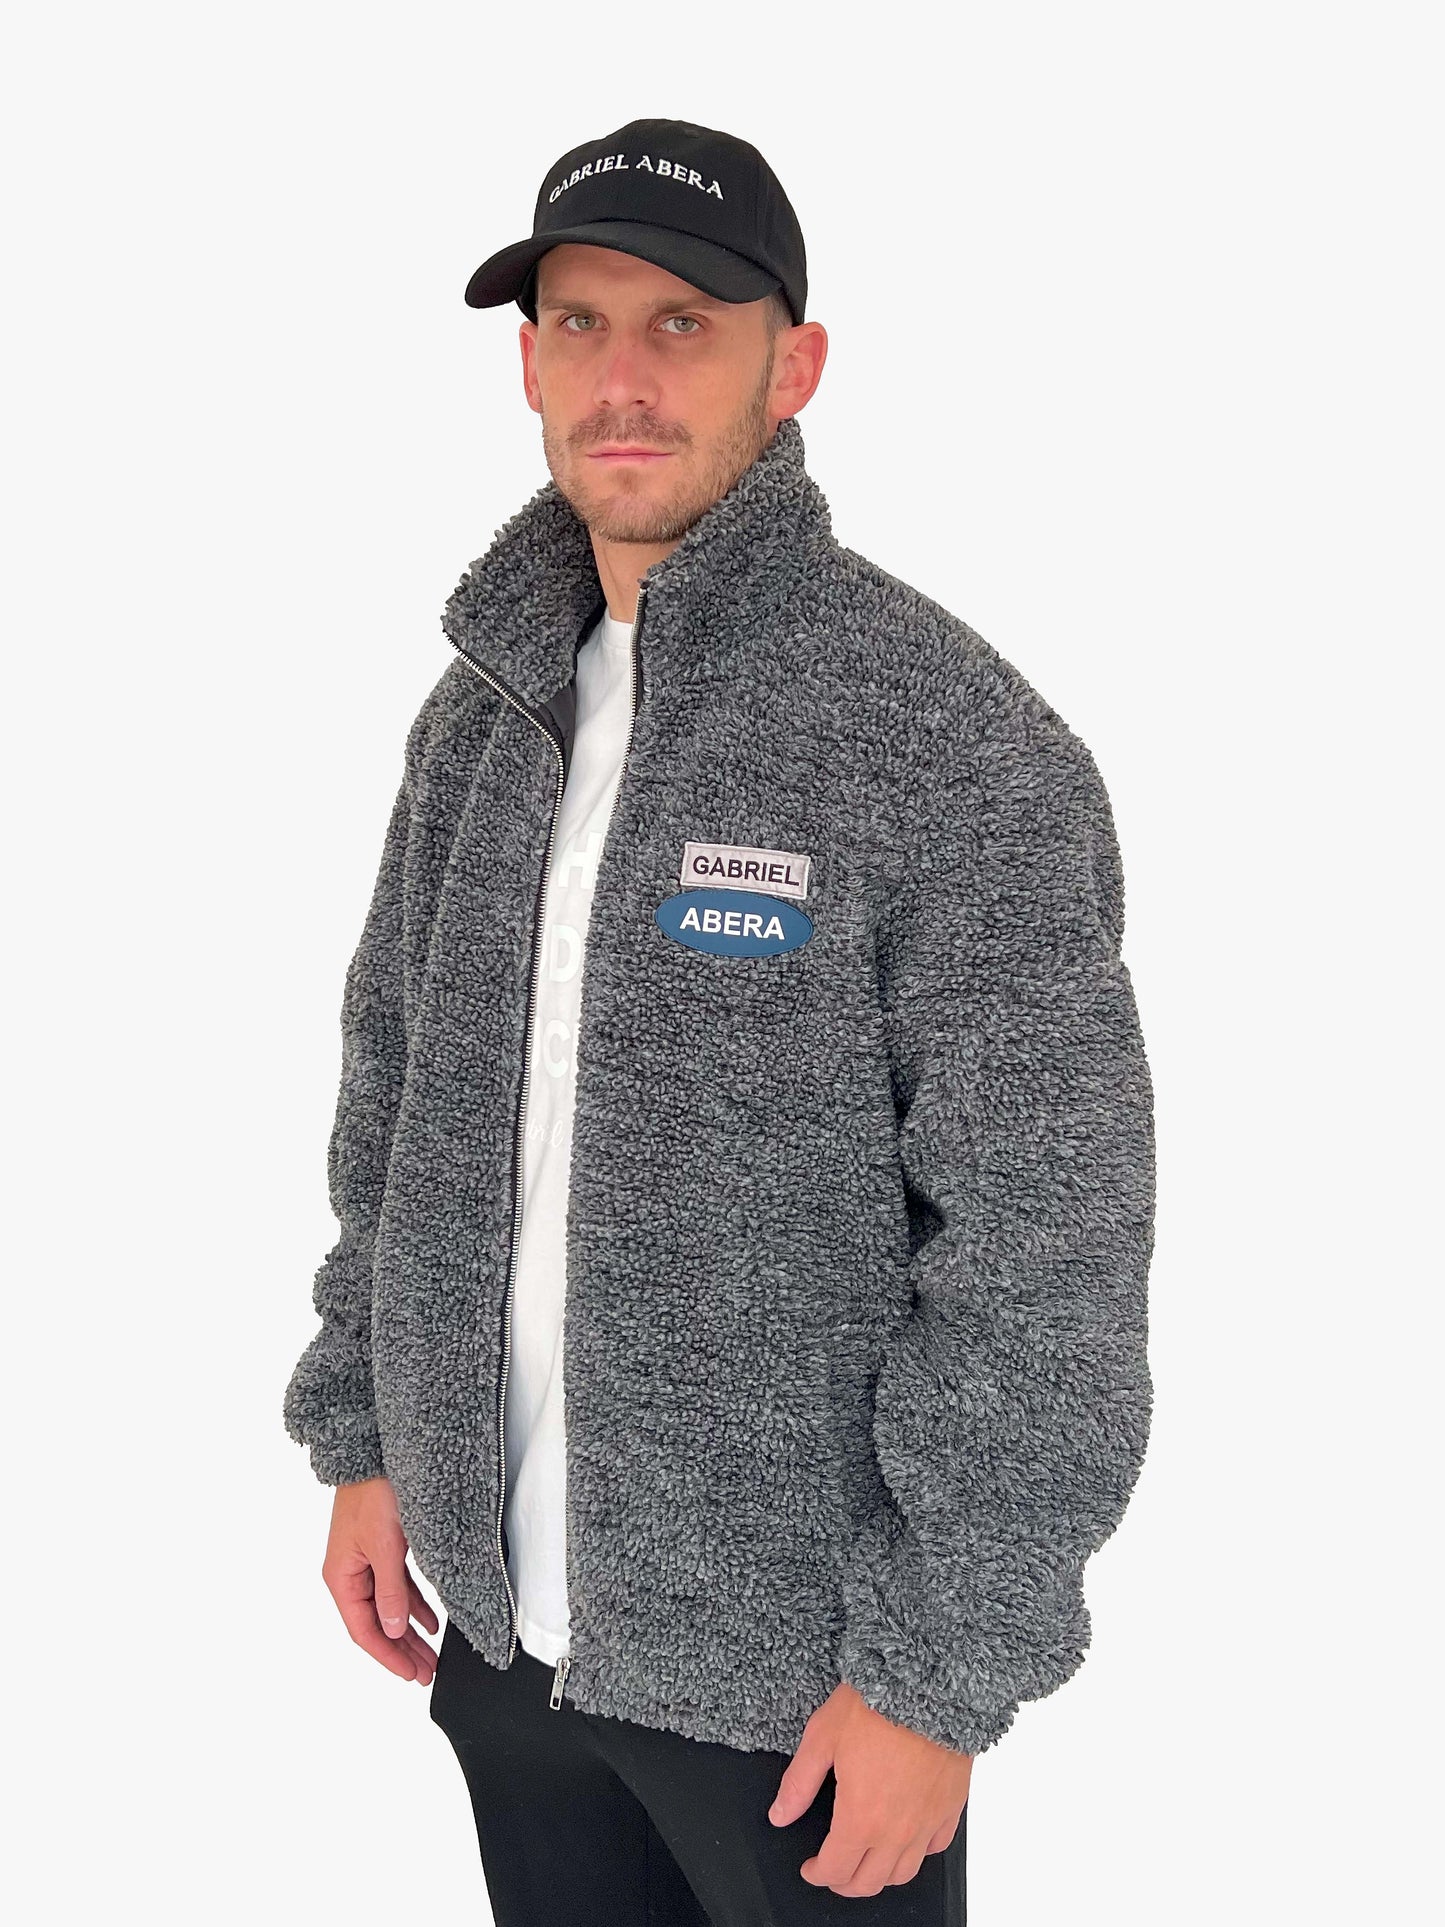 Male model wearing a black fleece jacket with grey and blue brand patches